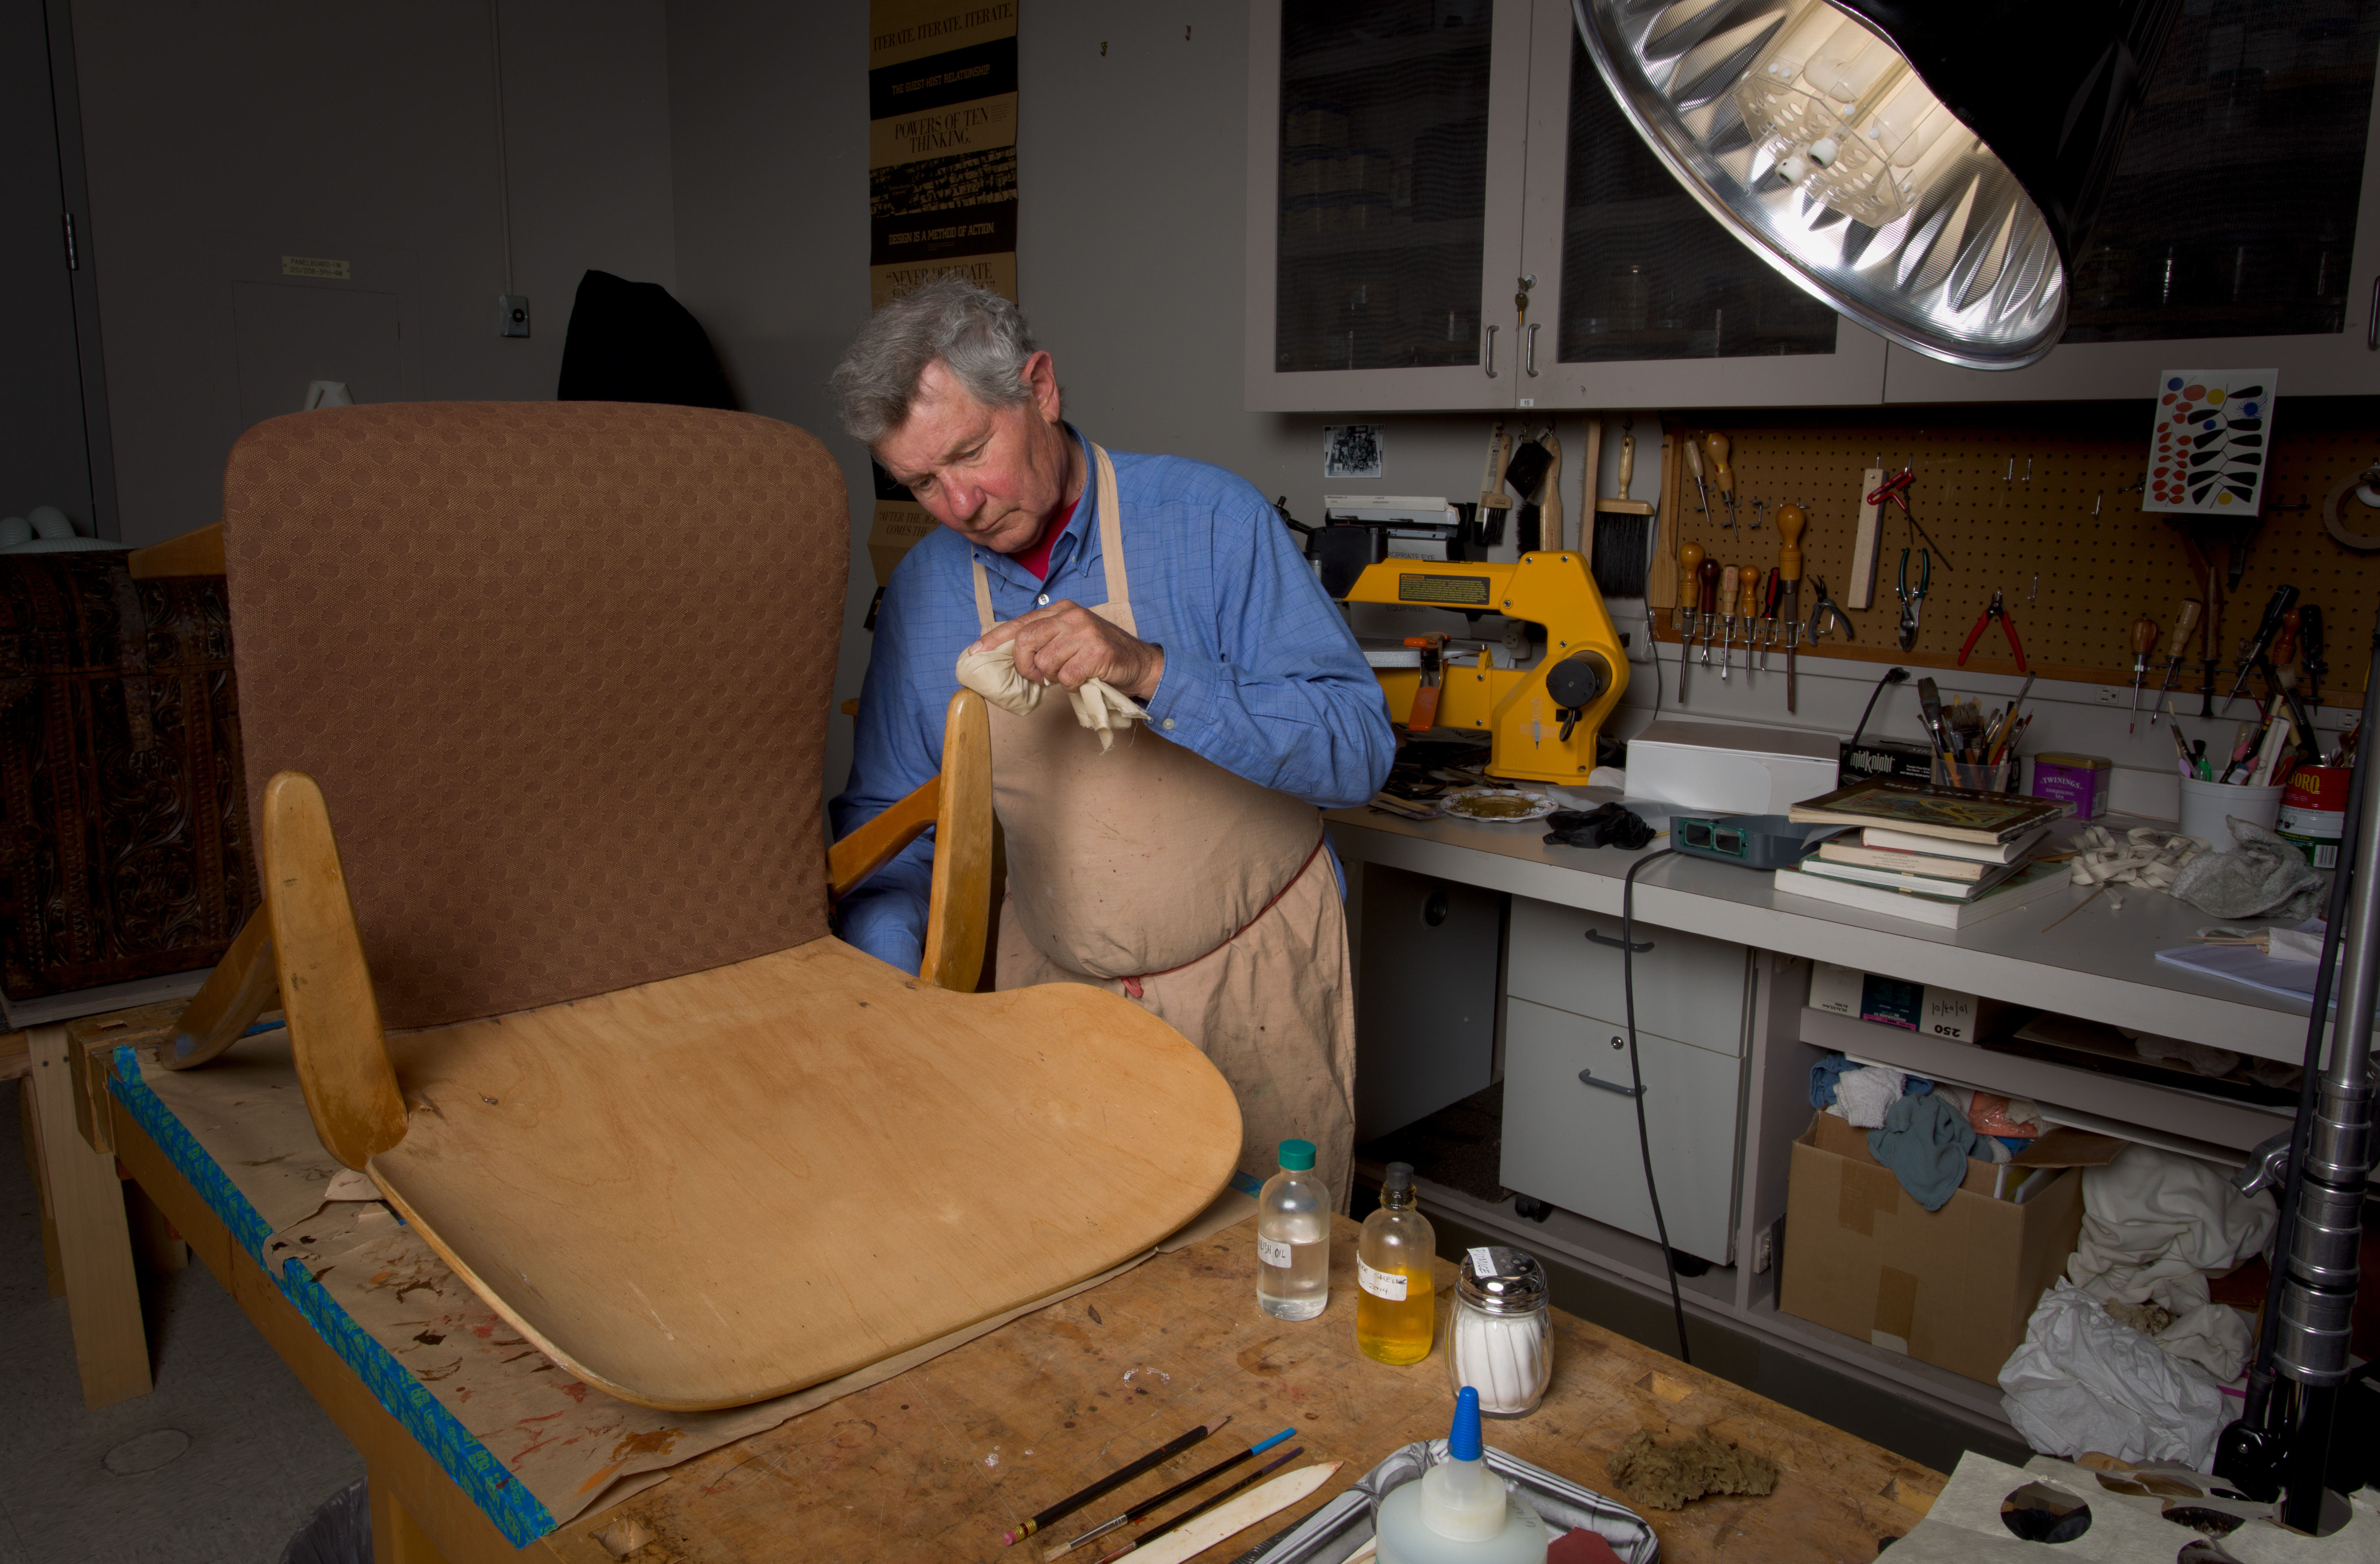 Don Menveg, Object Conservator, treating the Domus armchair frame, photo © Museum Associates/LACMA Conservation, by Yosi Pozeilov